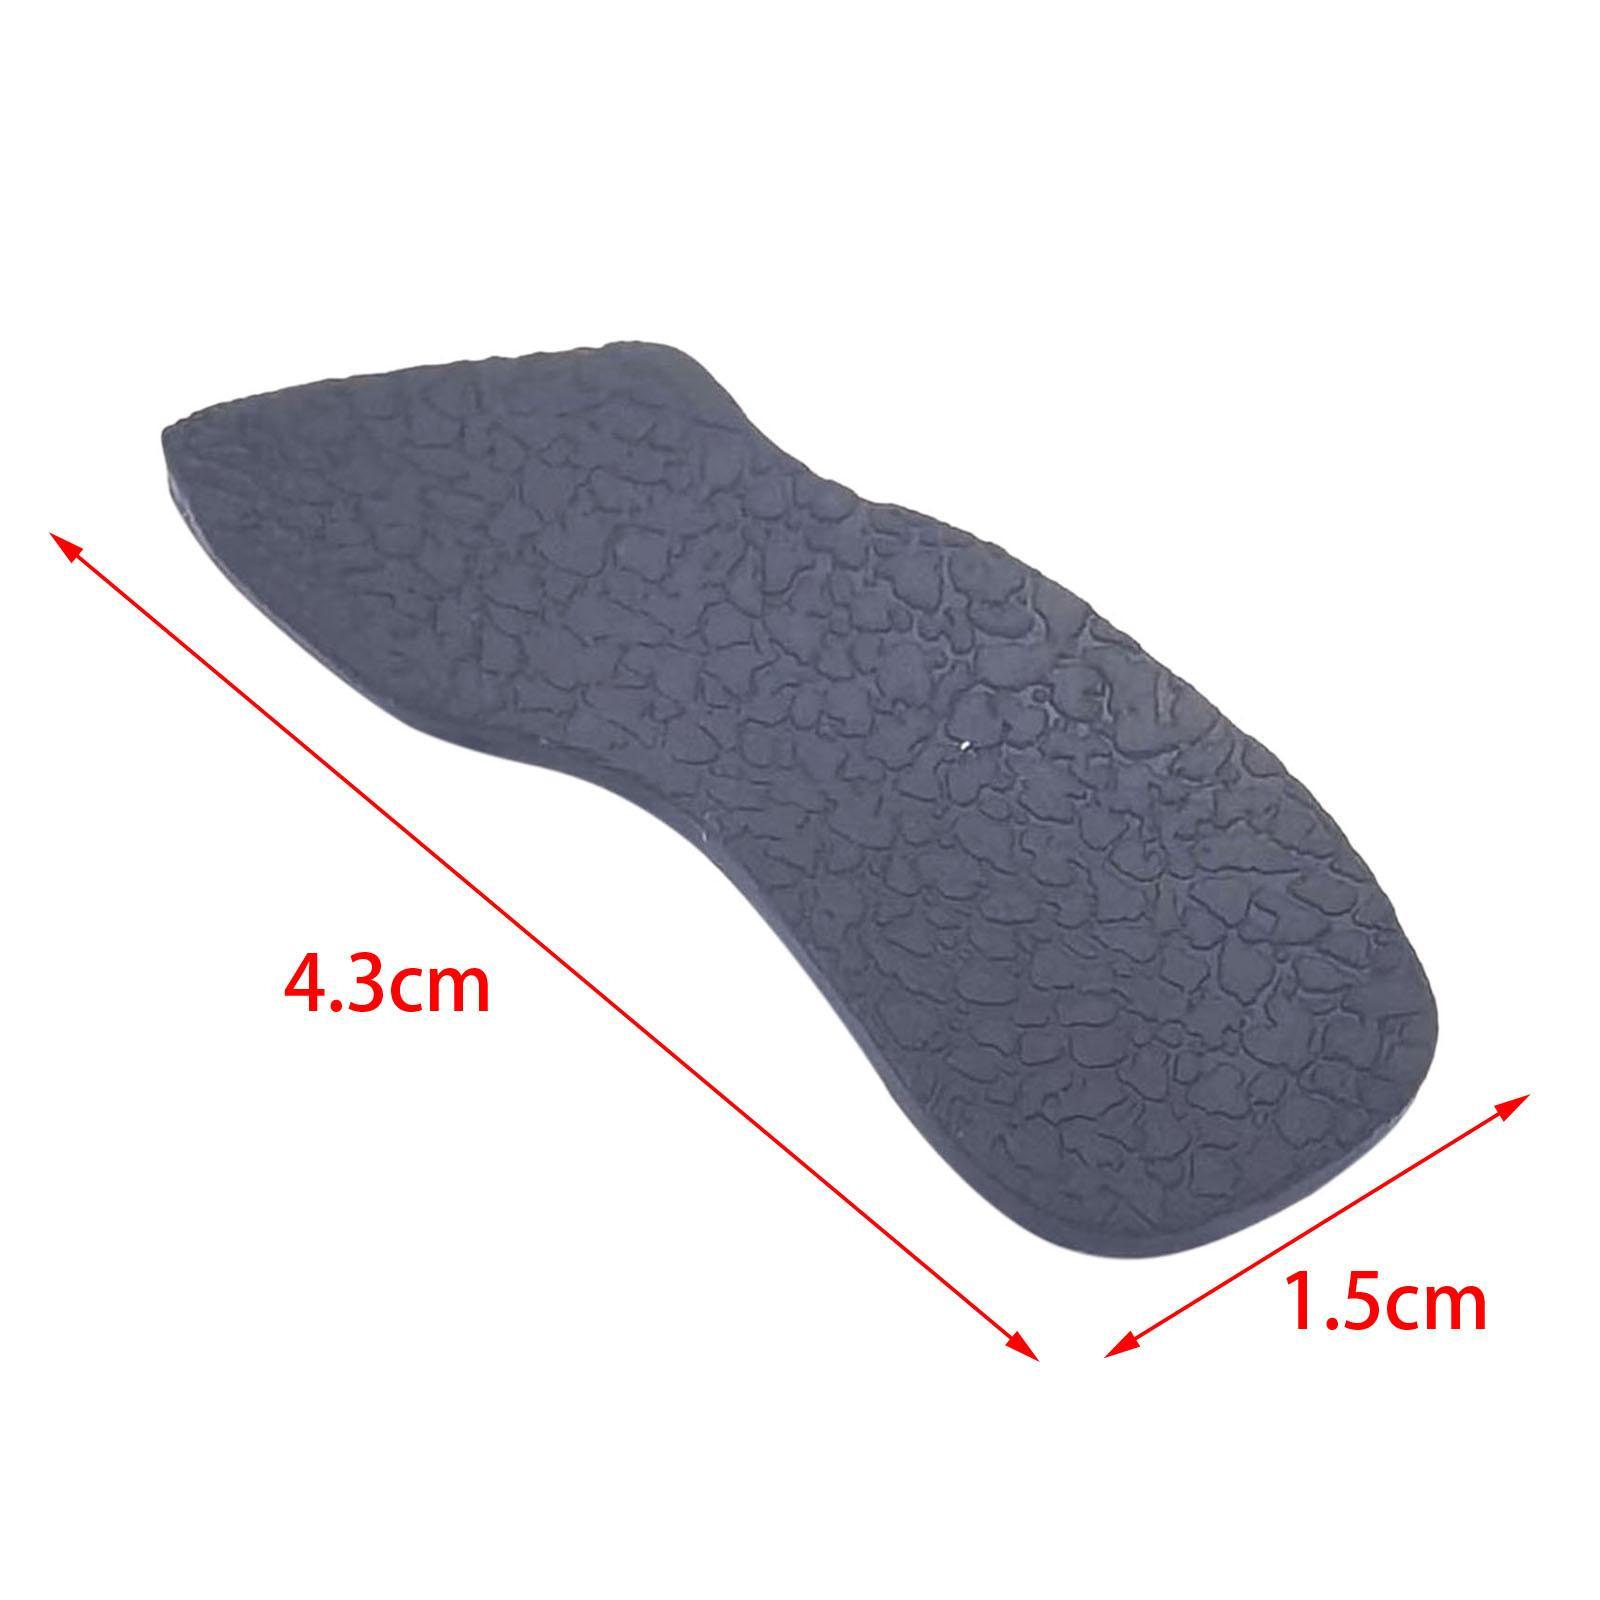 Thumb Rubber Grip Rear Back Cover Repair Parts Durable for 600D Camera